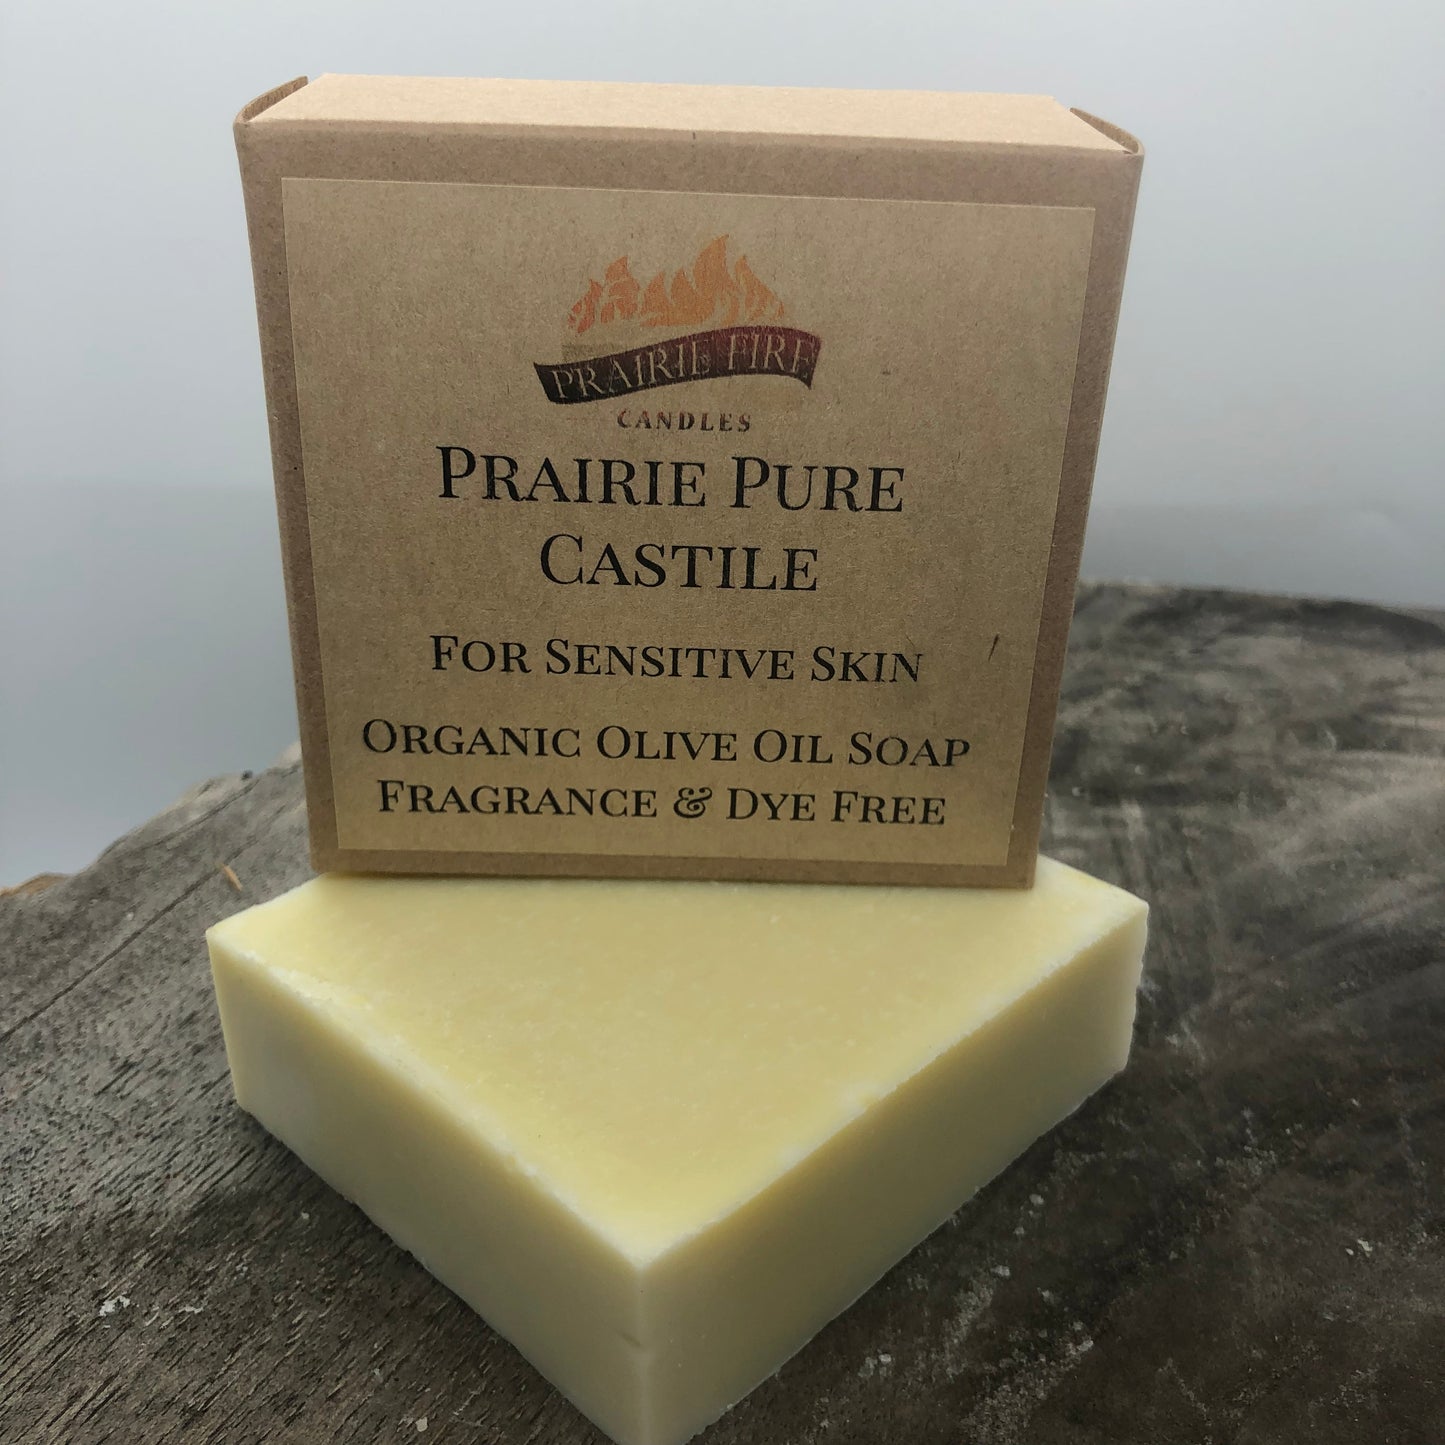 Pure Real  Castile Organic Olive Oil Soap for Sensitive Skin - Fragrance Free and Dye Free - 100% Certified Organic Extra Virgin Olive Oil